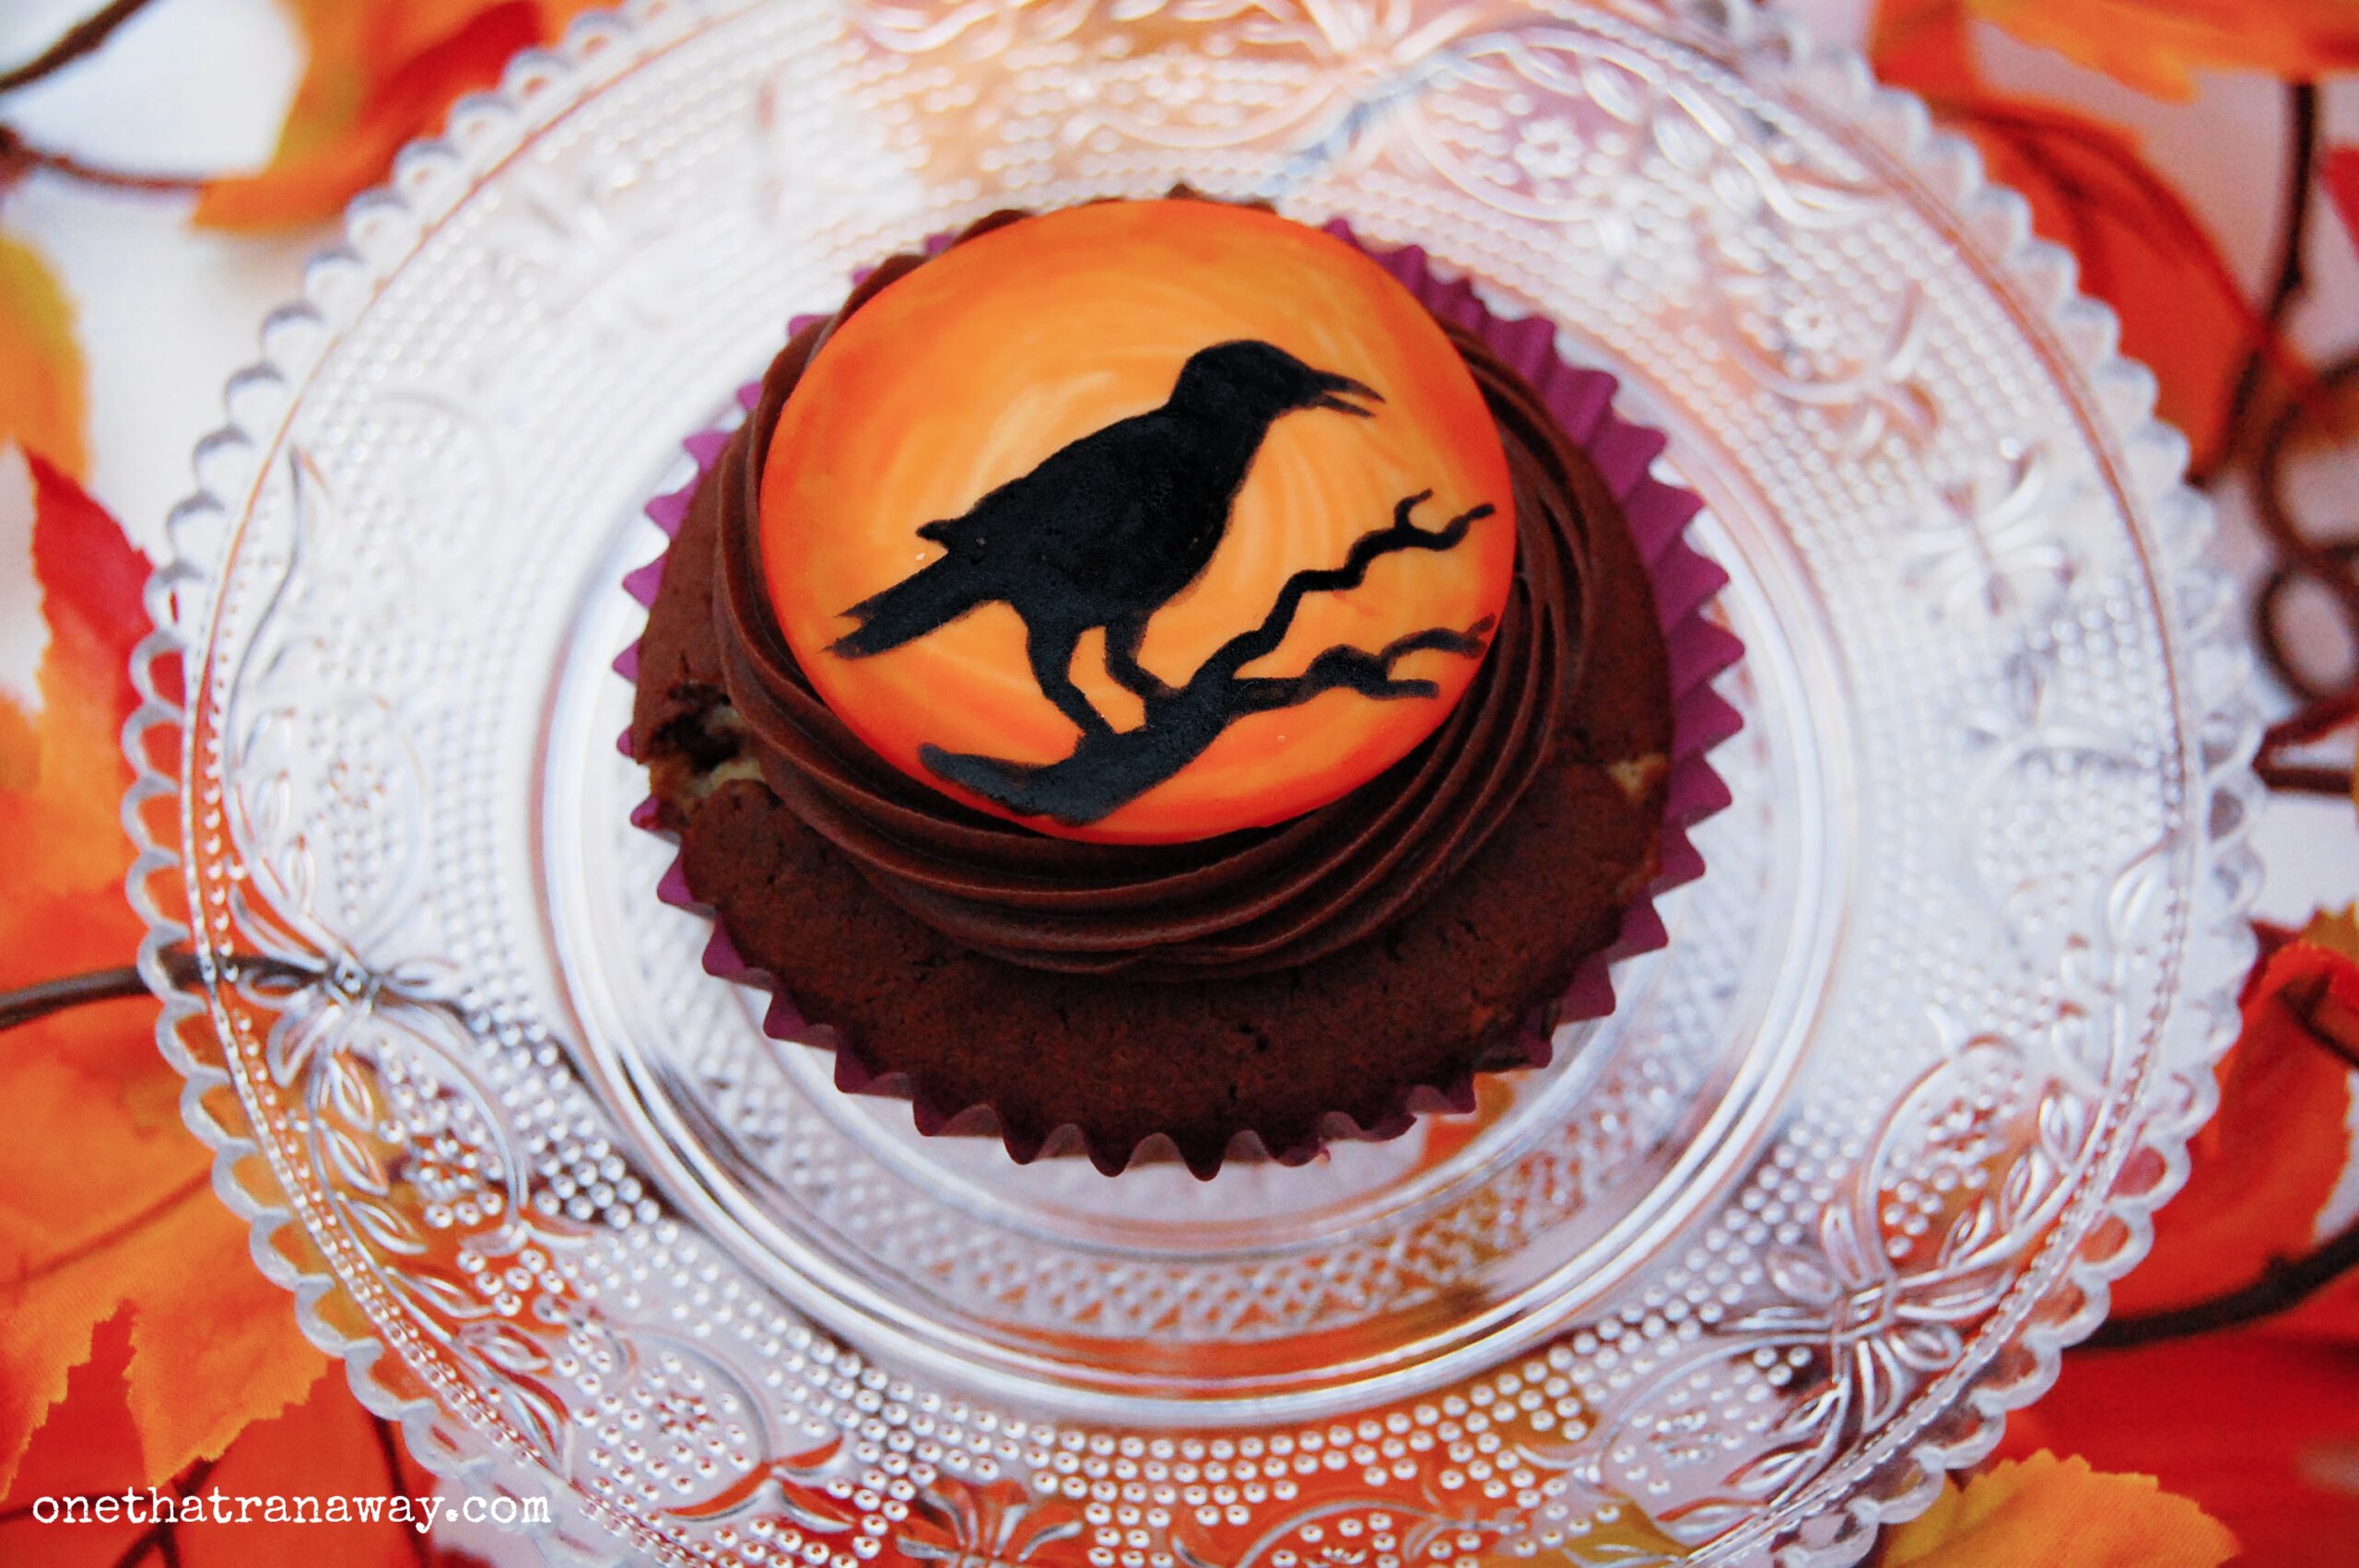 chocolate cupcake with an orange fondant topper showing the silhouette of a raven